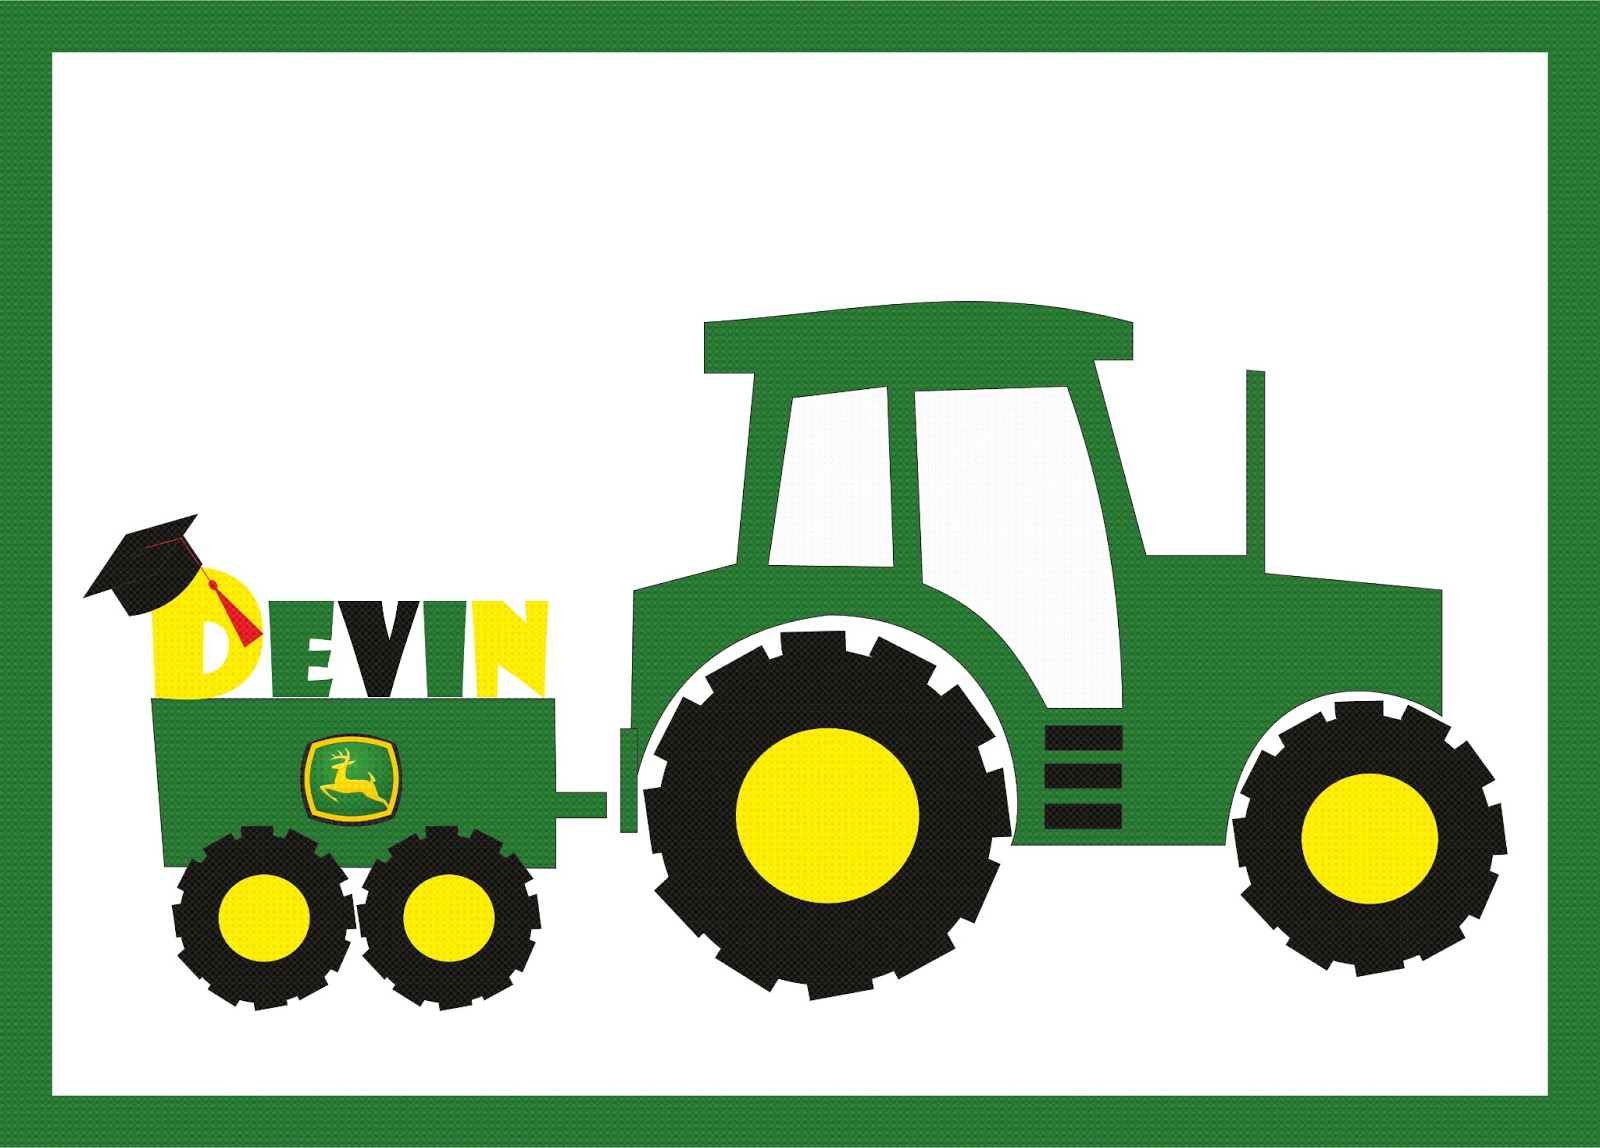 tractor clipart